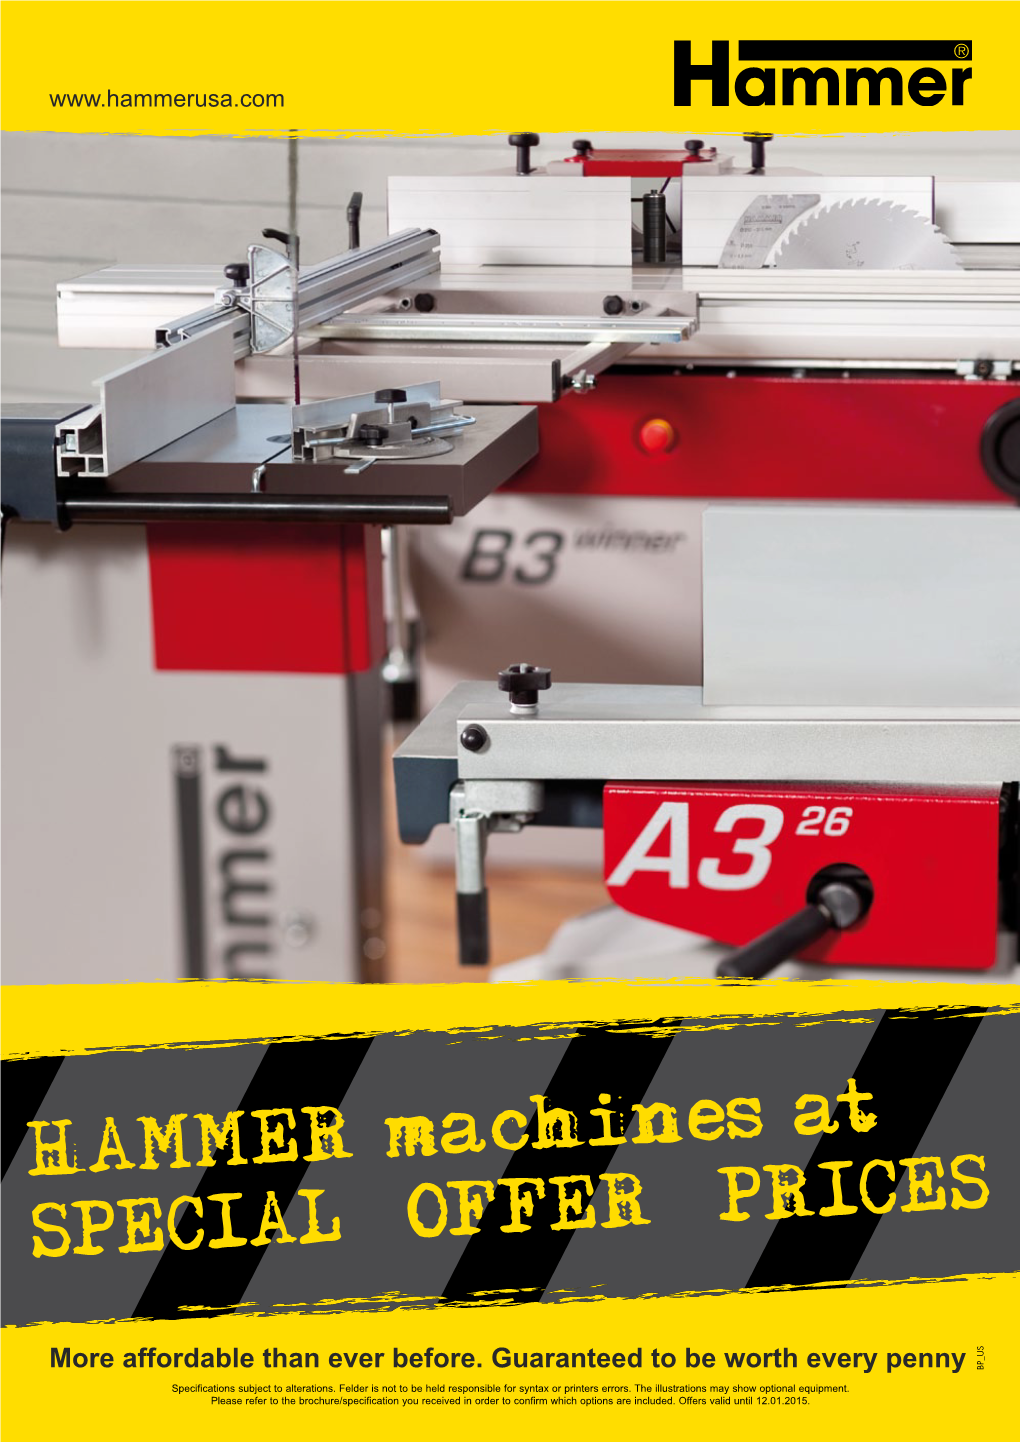 Hammer Machines at Special Offer Prices